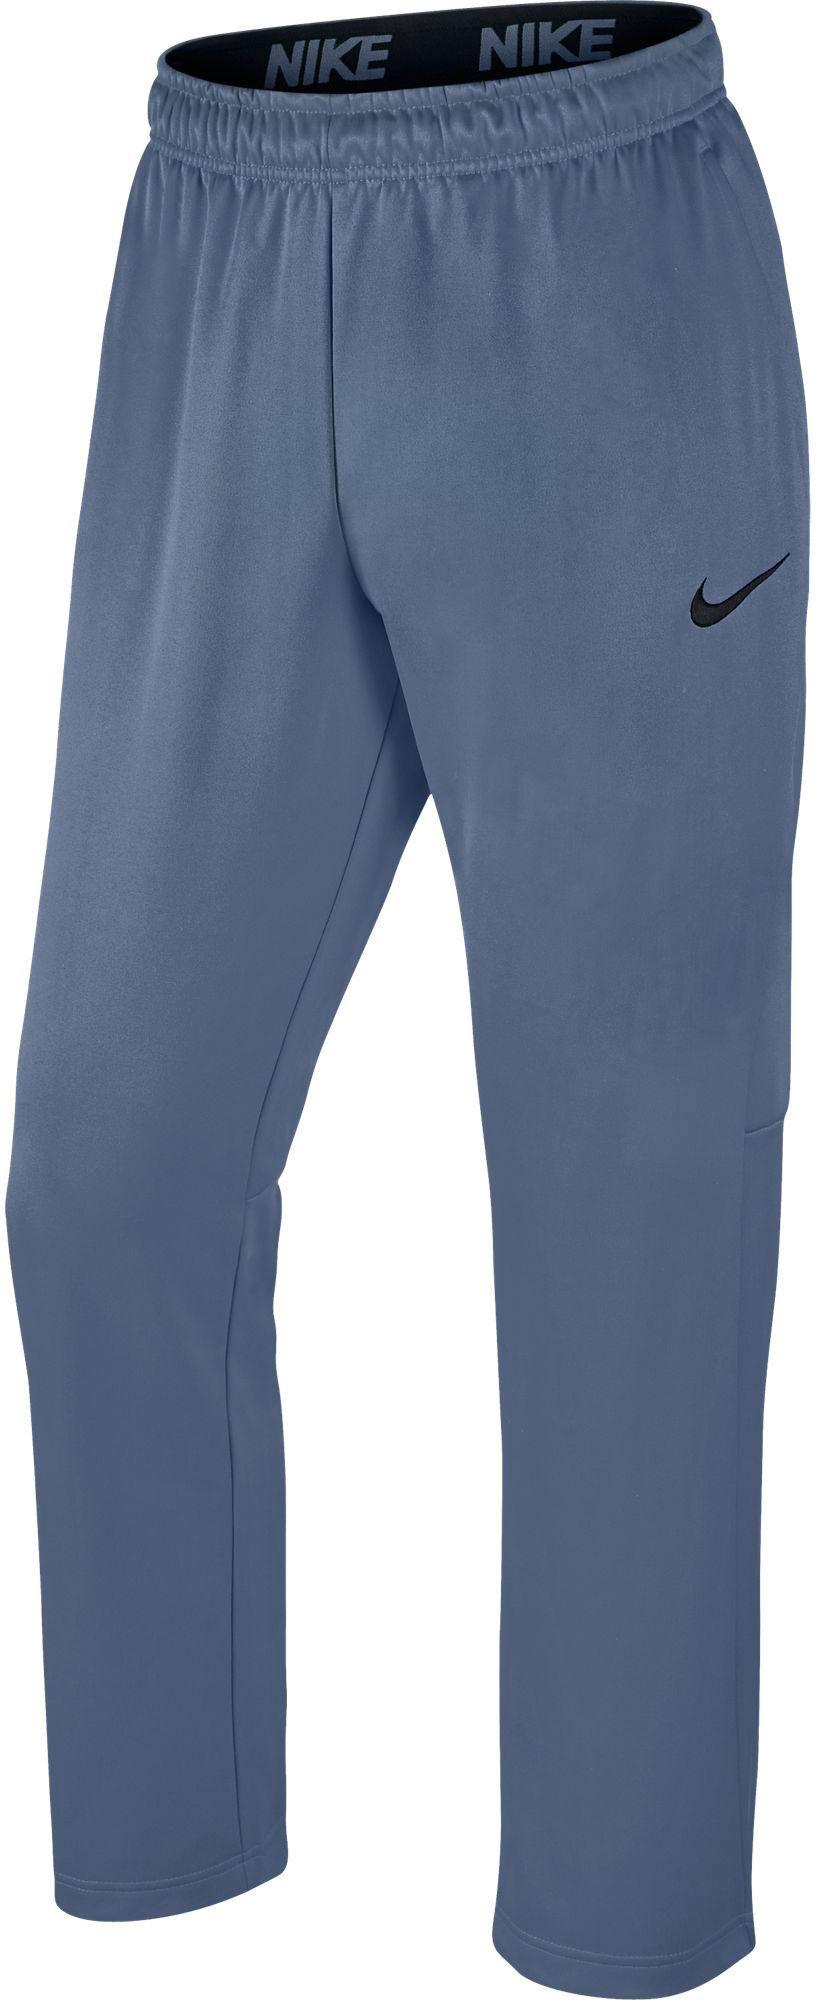 Nike Synthetic Regular Therma Pants in Blue for Men - Lyst